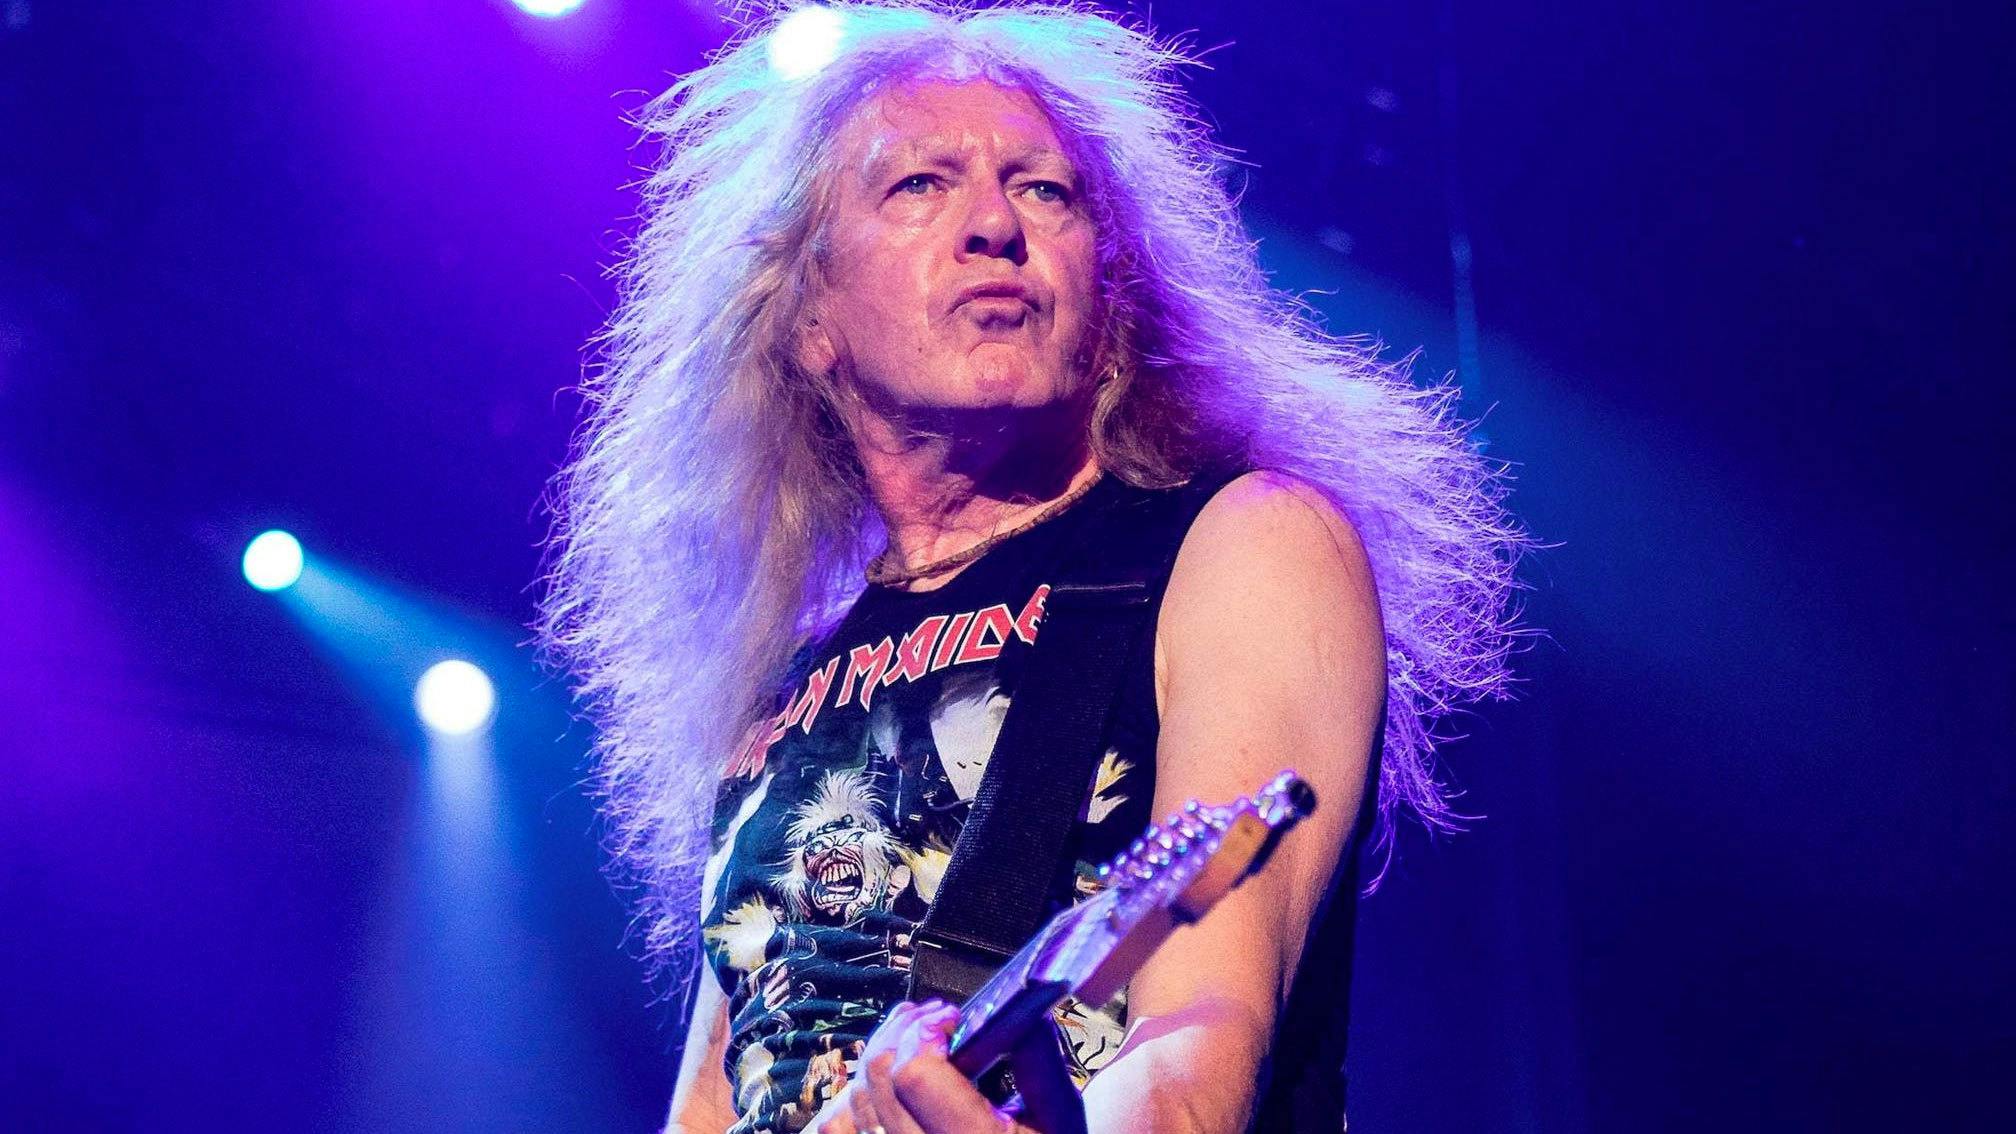 Watch Iron Maiden's Janick Gers Accidentally Hurl His Guitar Into The Crowd